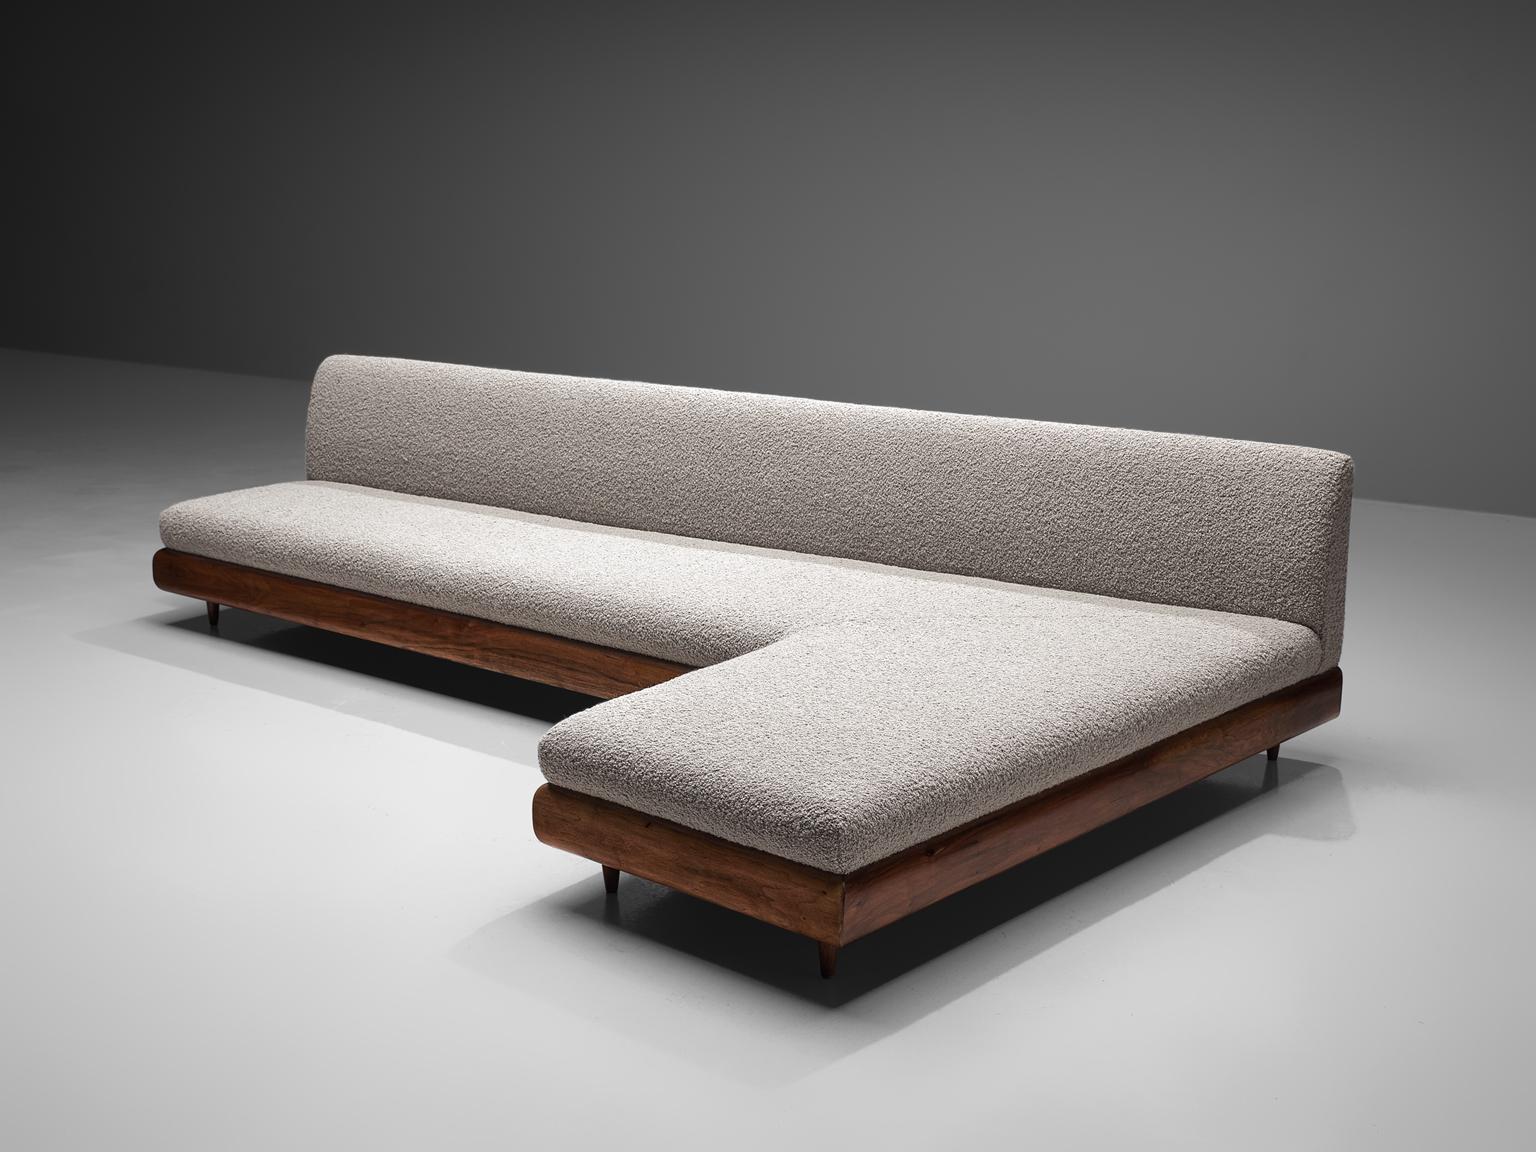 Adrian Pearsall, 'Boomerang' sofa, in Pierre Frey fabric and walnut, United States, 1960s

This boomerang sofa has a unique shape with sinuous lines which create a monumental and inviting look. The right-facing sofa is a great addition to a living